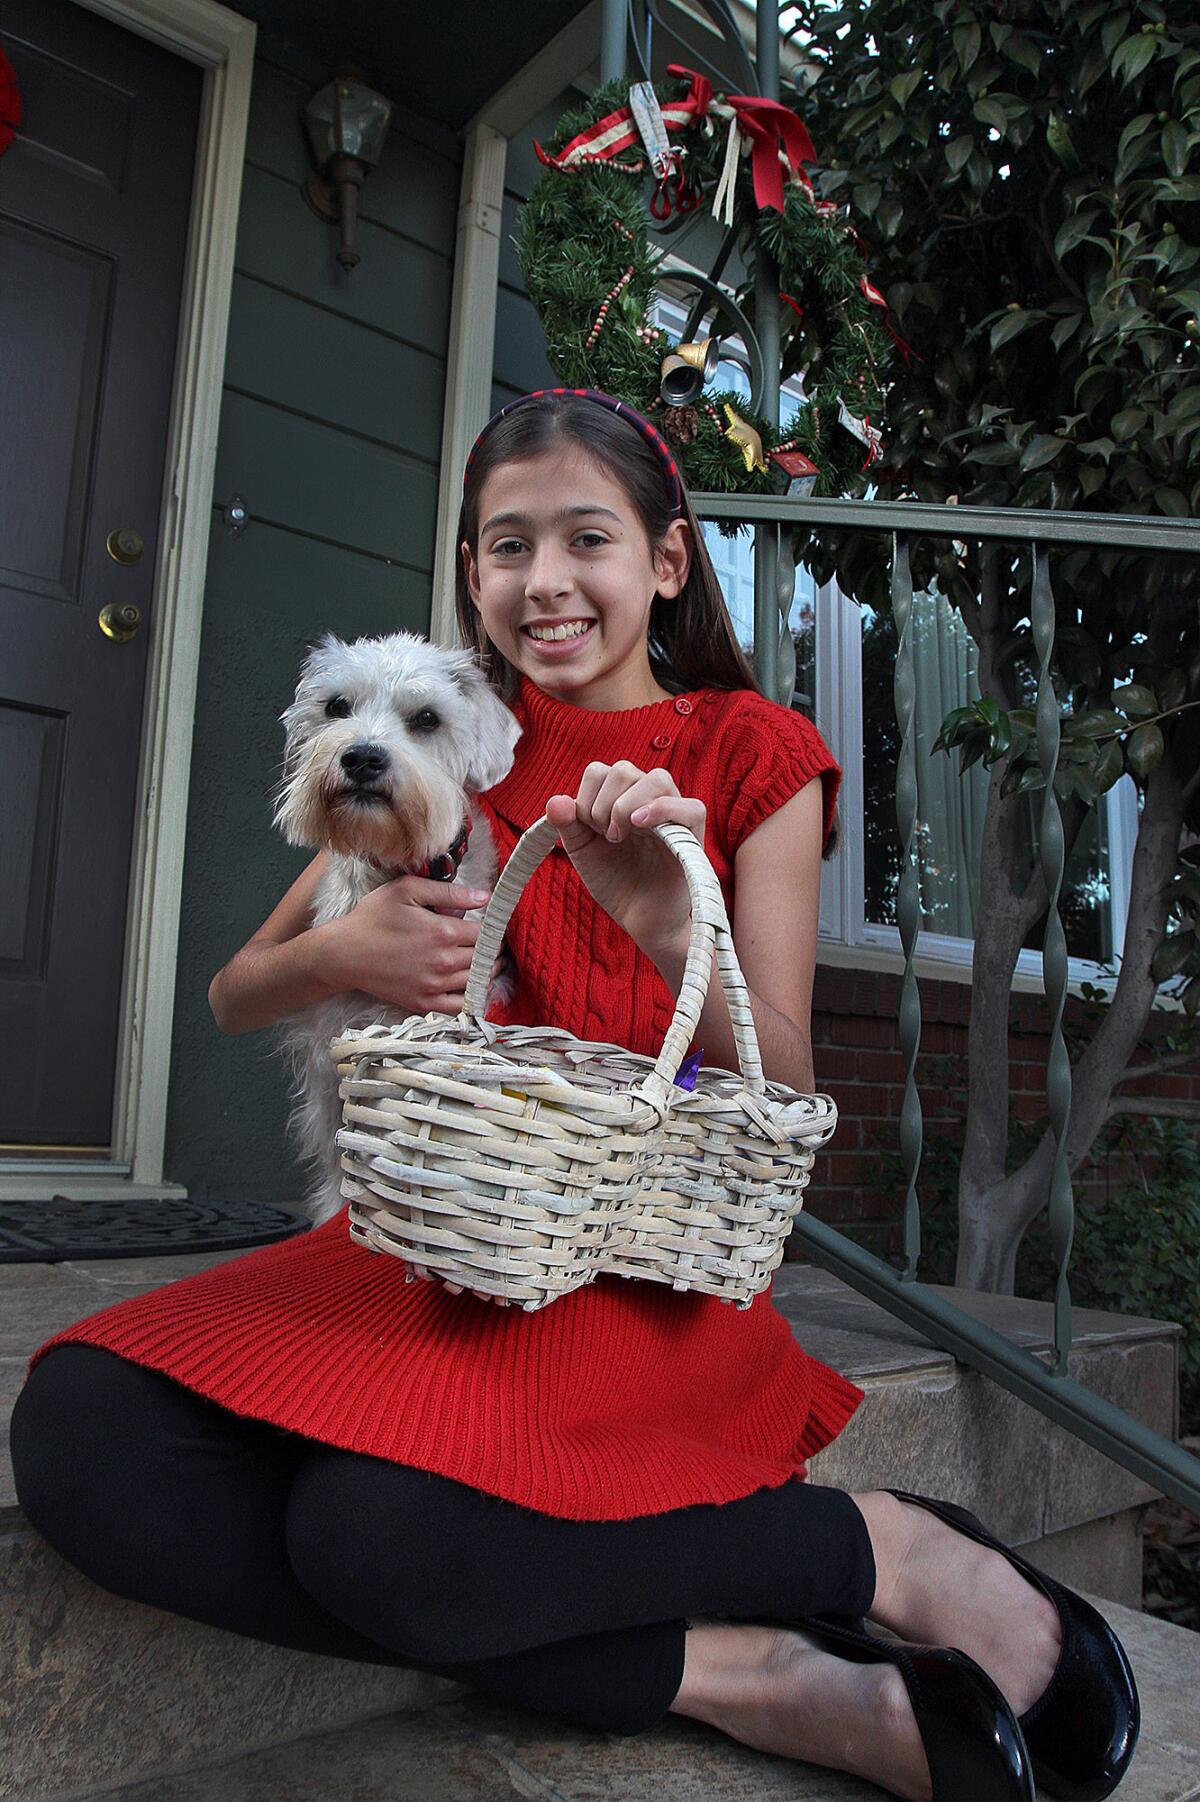 Catherine de Wolff, 10, of Burbank, poses with her dog Nicho and a basket of origami on the front step of her family home.